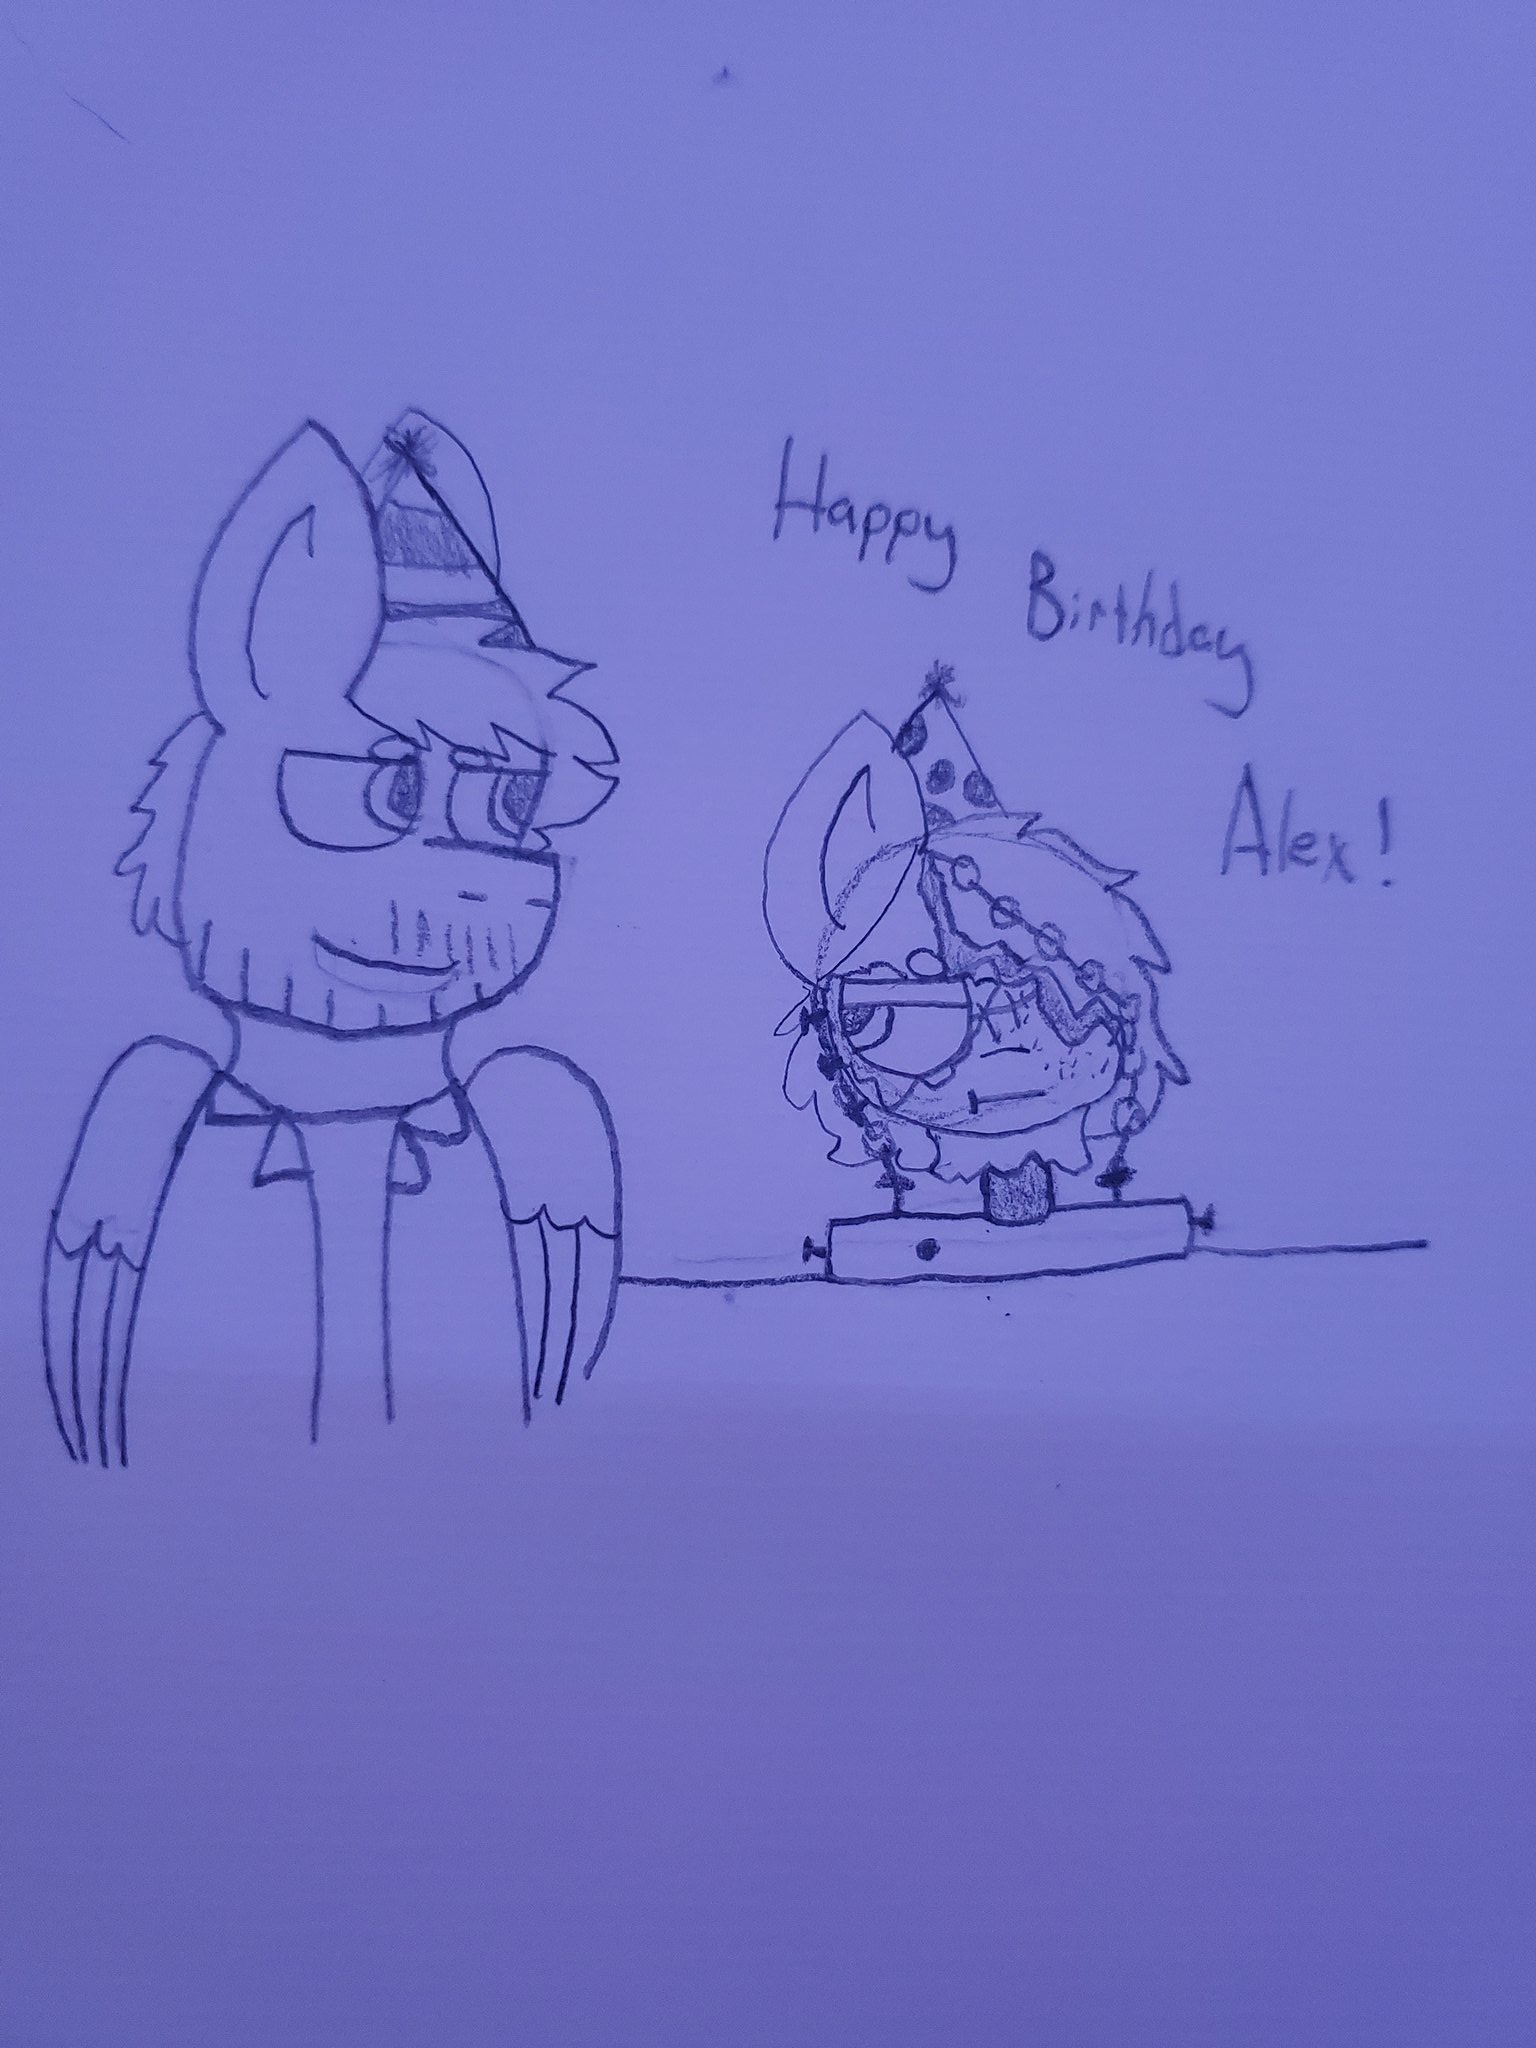  happy birthday Andy! It probably took a while to get that hat onto Chucky 